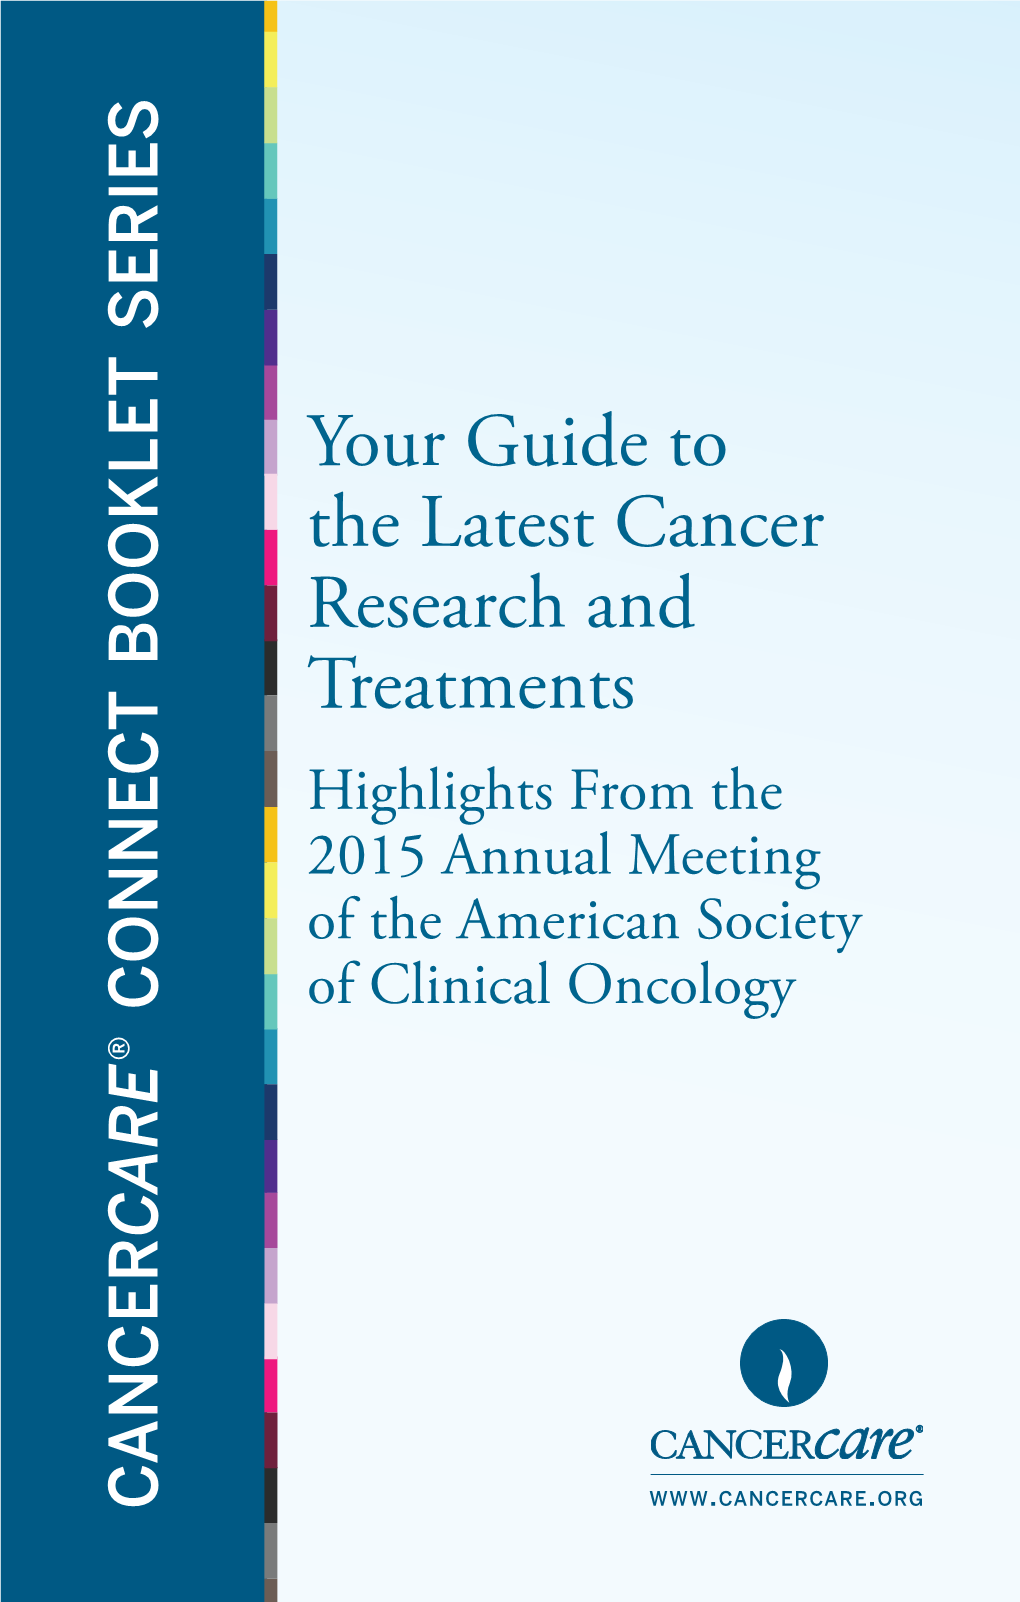 Your Guide to the Latest Cancer Research and Treatments